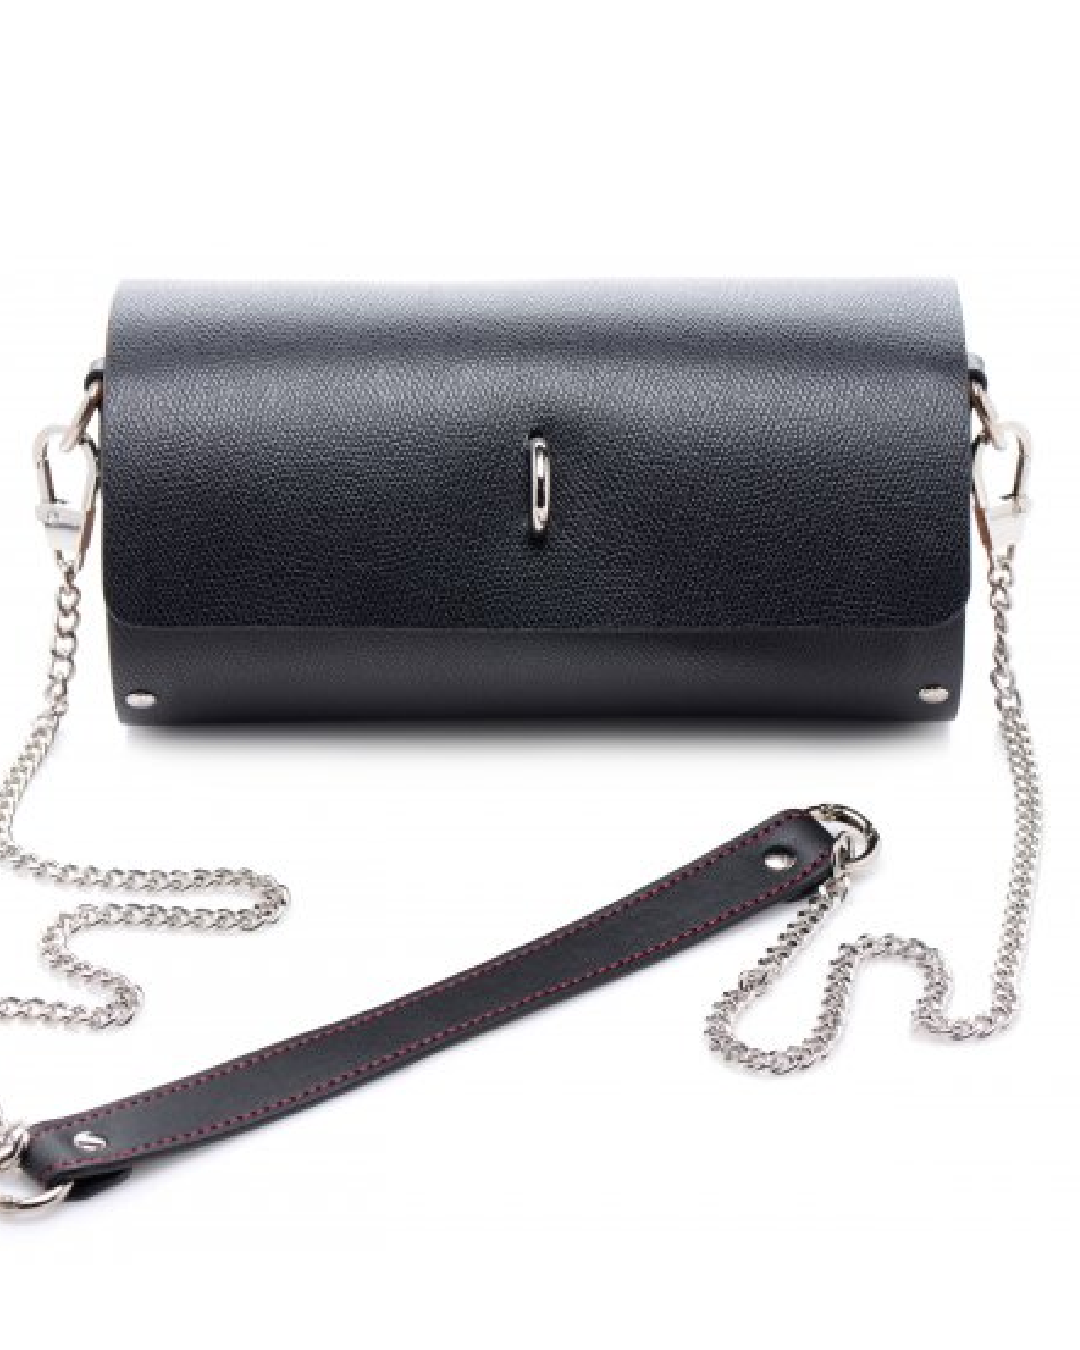 Kinky Clutch Black Bondage Set With Carrying Case case alone closed